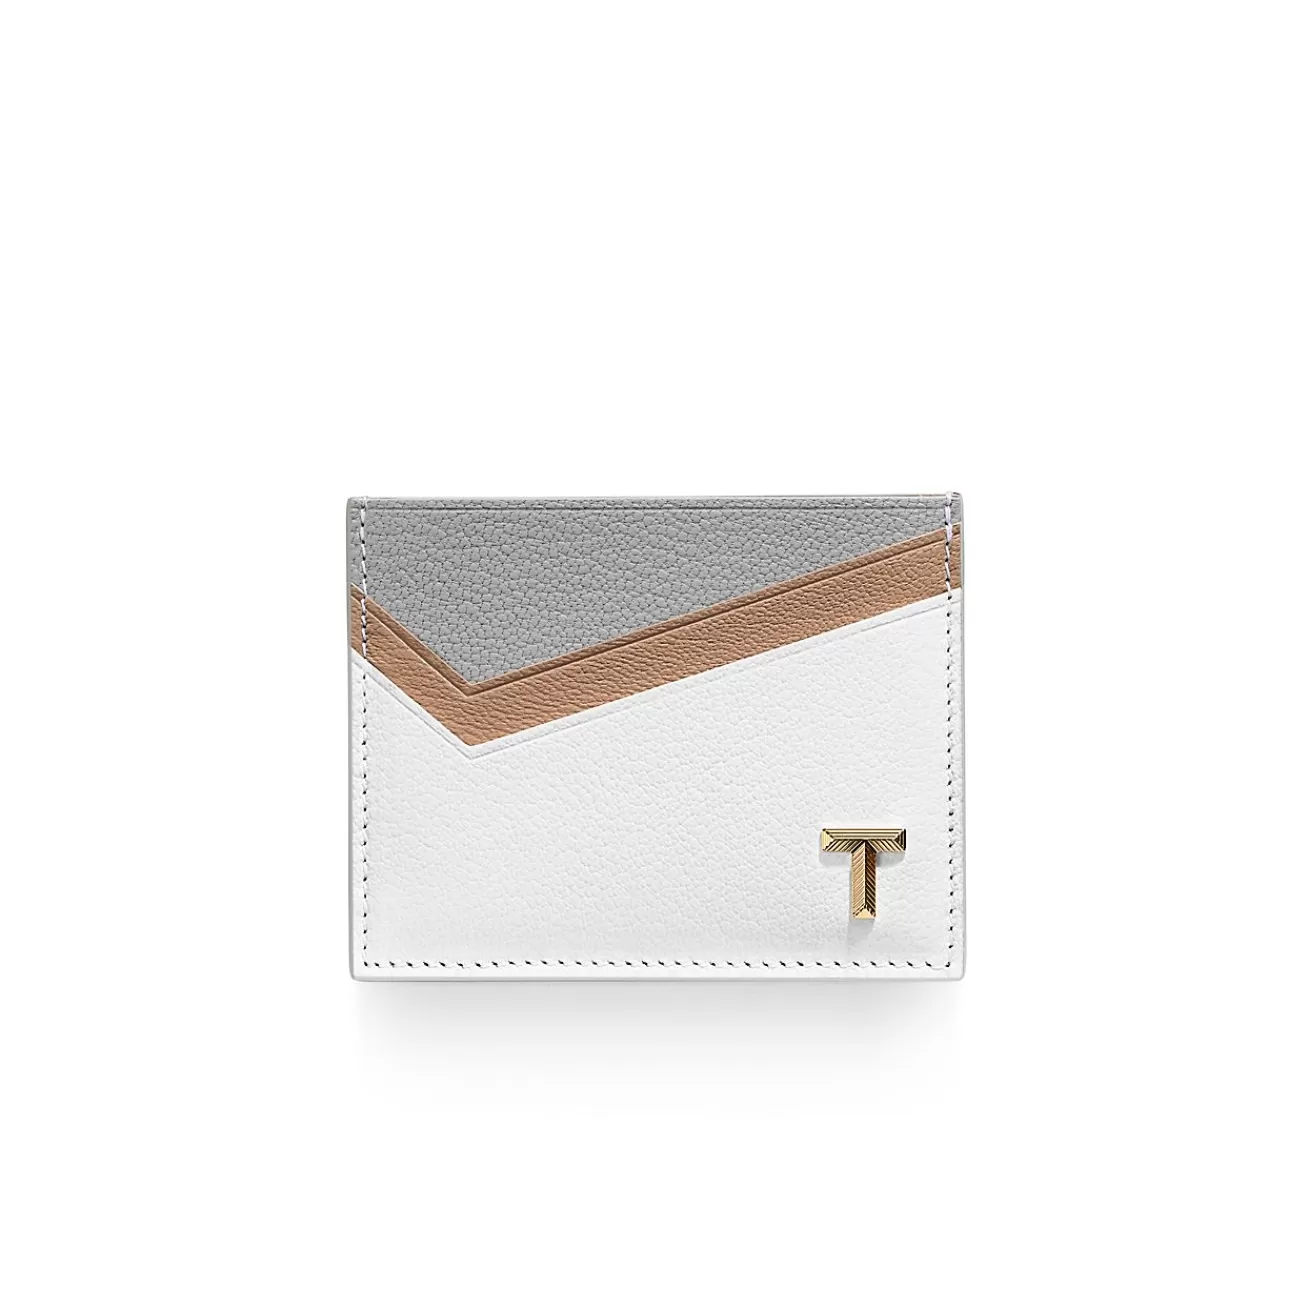 Tiffany & Co. Tiffany T Card Case in Taupe Colorblock Leather | ^Women Business Gifts | Small Leather Goods